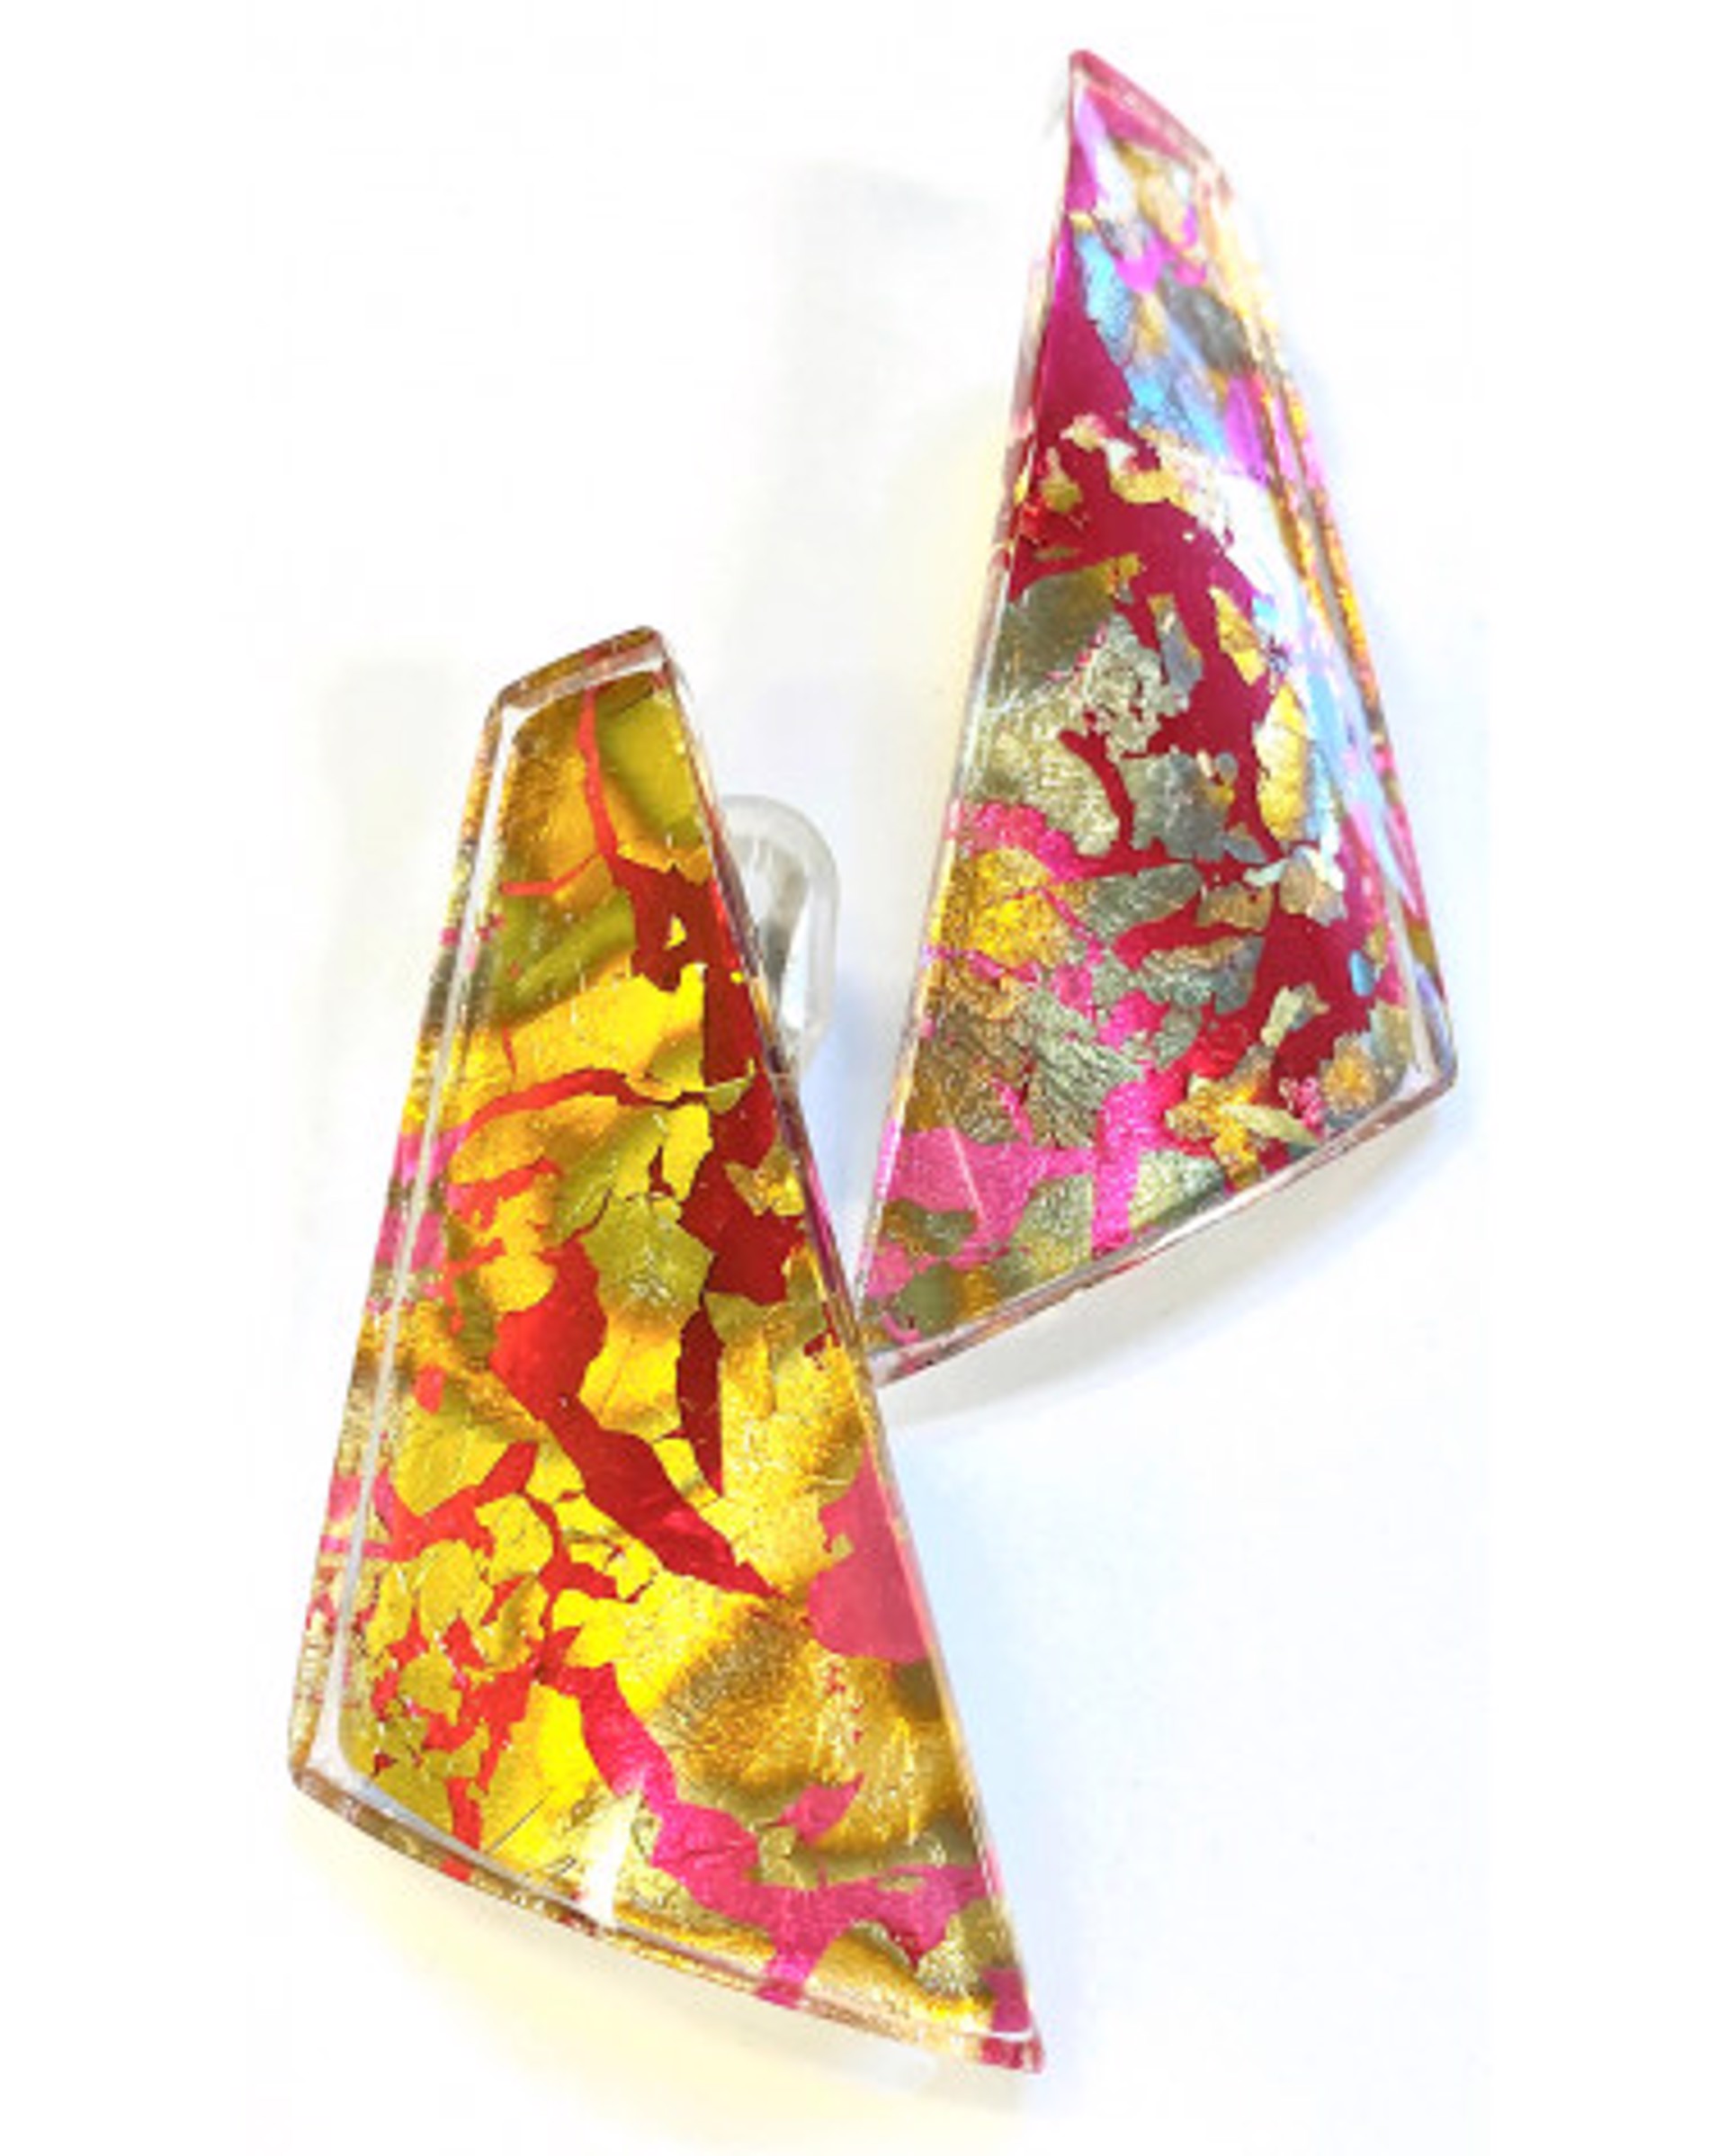 LG-Cleopatre Triangle Earrings Gold Foil Inclusions by Laurent Guillot Nikaia Inc.